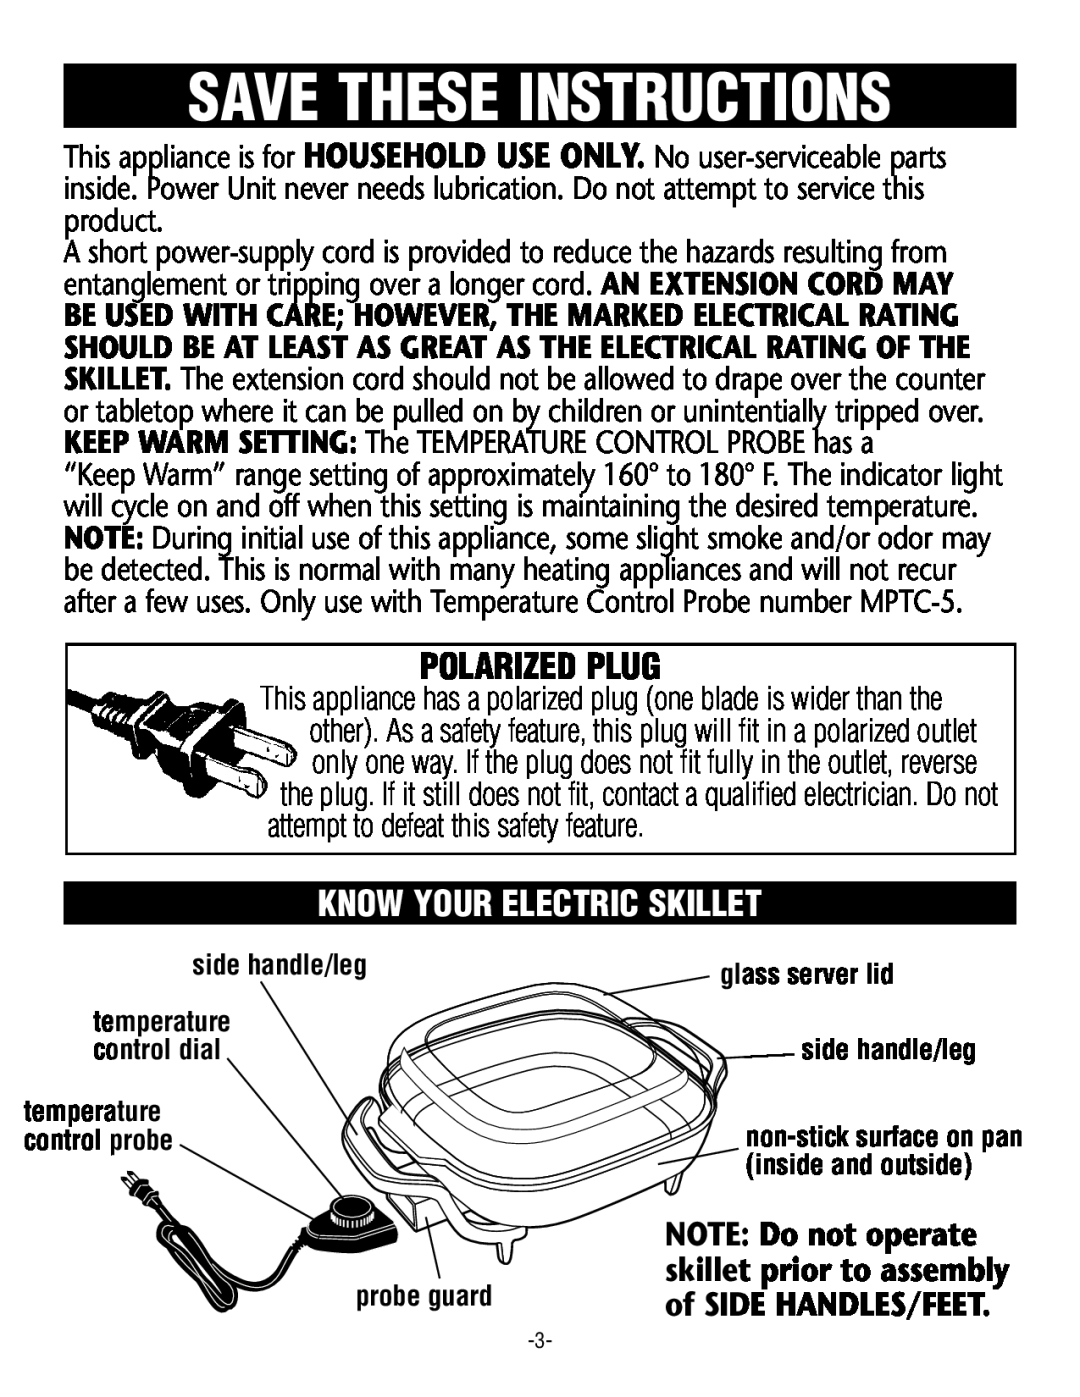 Rival S12 G manual Know Your Electric Skillet, Save These Instructions, Polarized Plug, side handle/leg, probe guard 